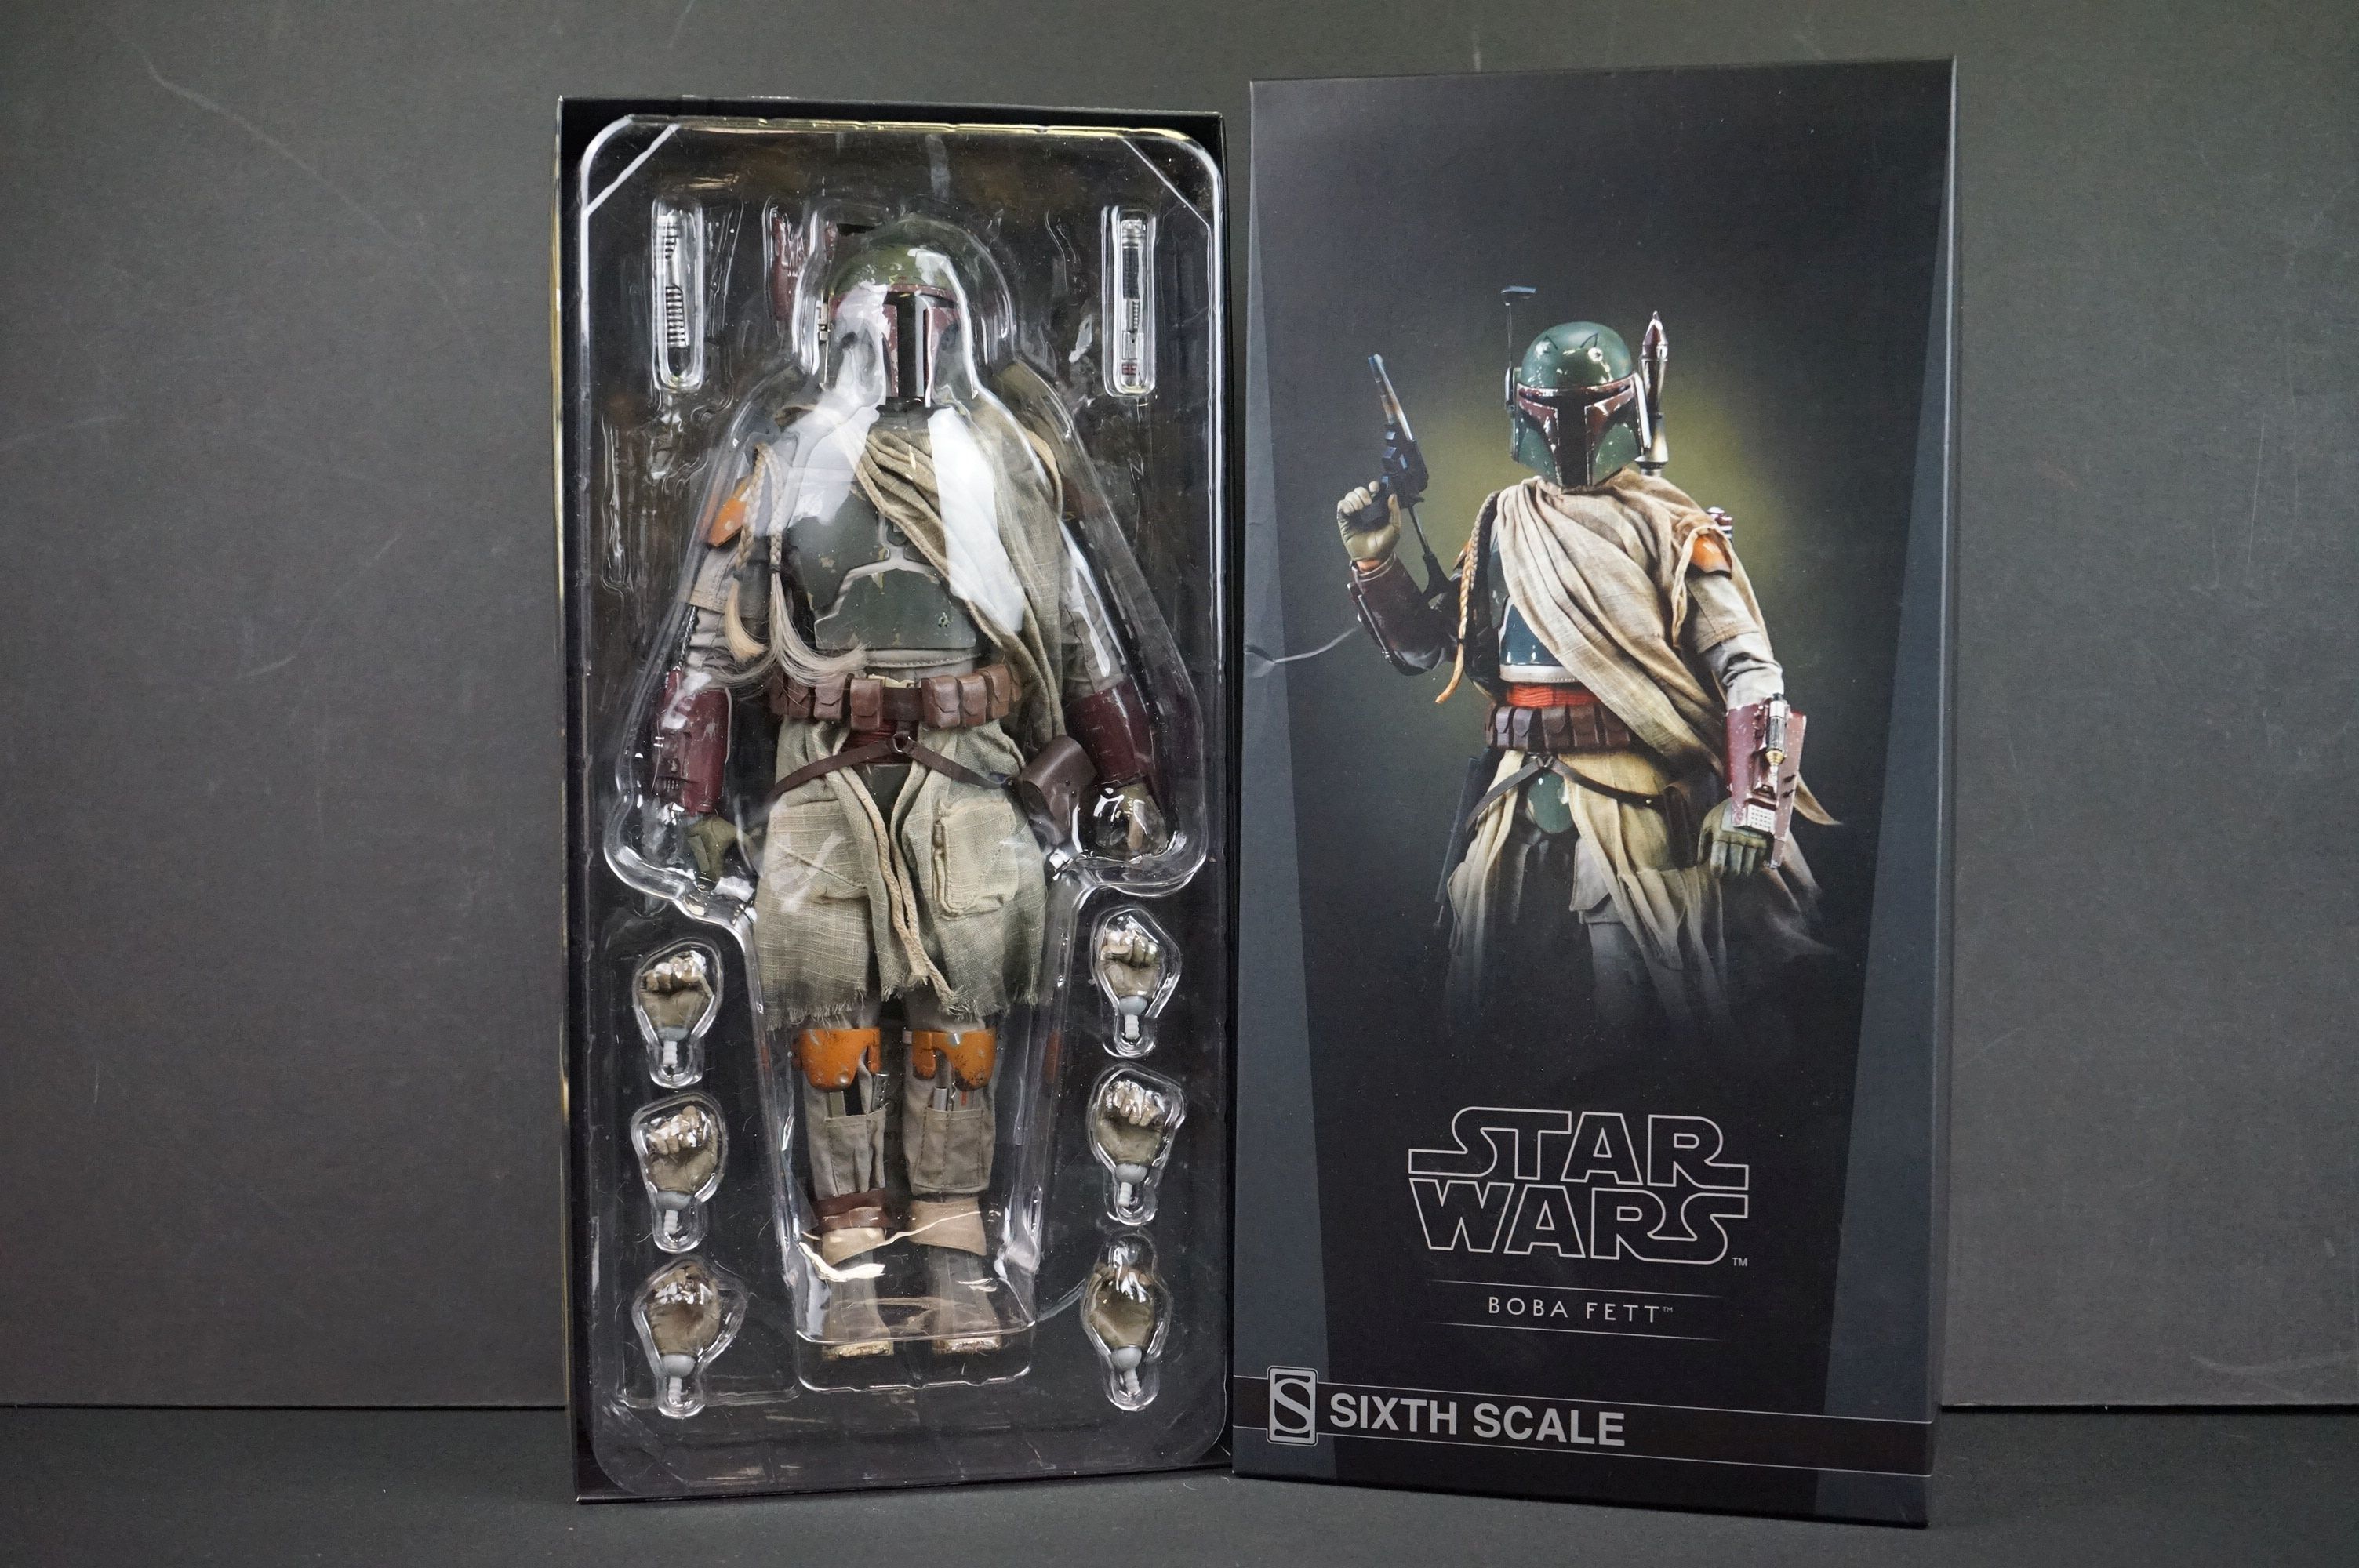 Star Wars - Boxed Sideshow Collectibles Star Wars Boba Fett Sixth Scale Figure in original shop box,